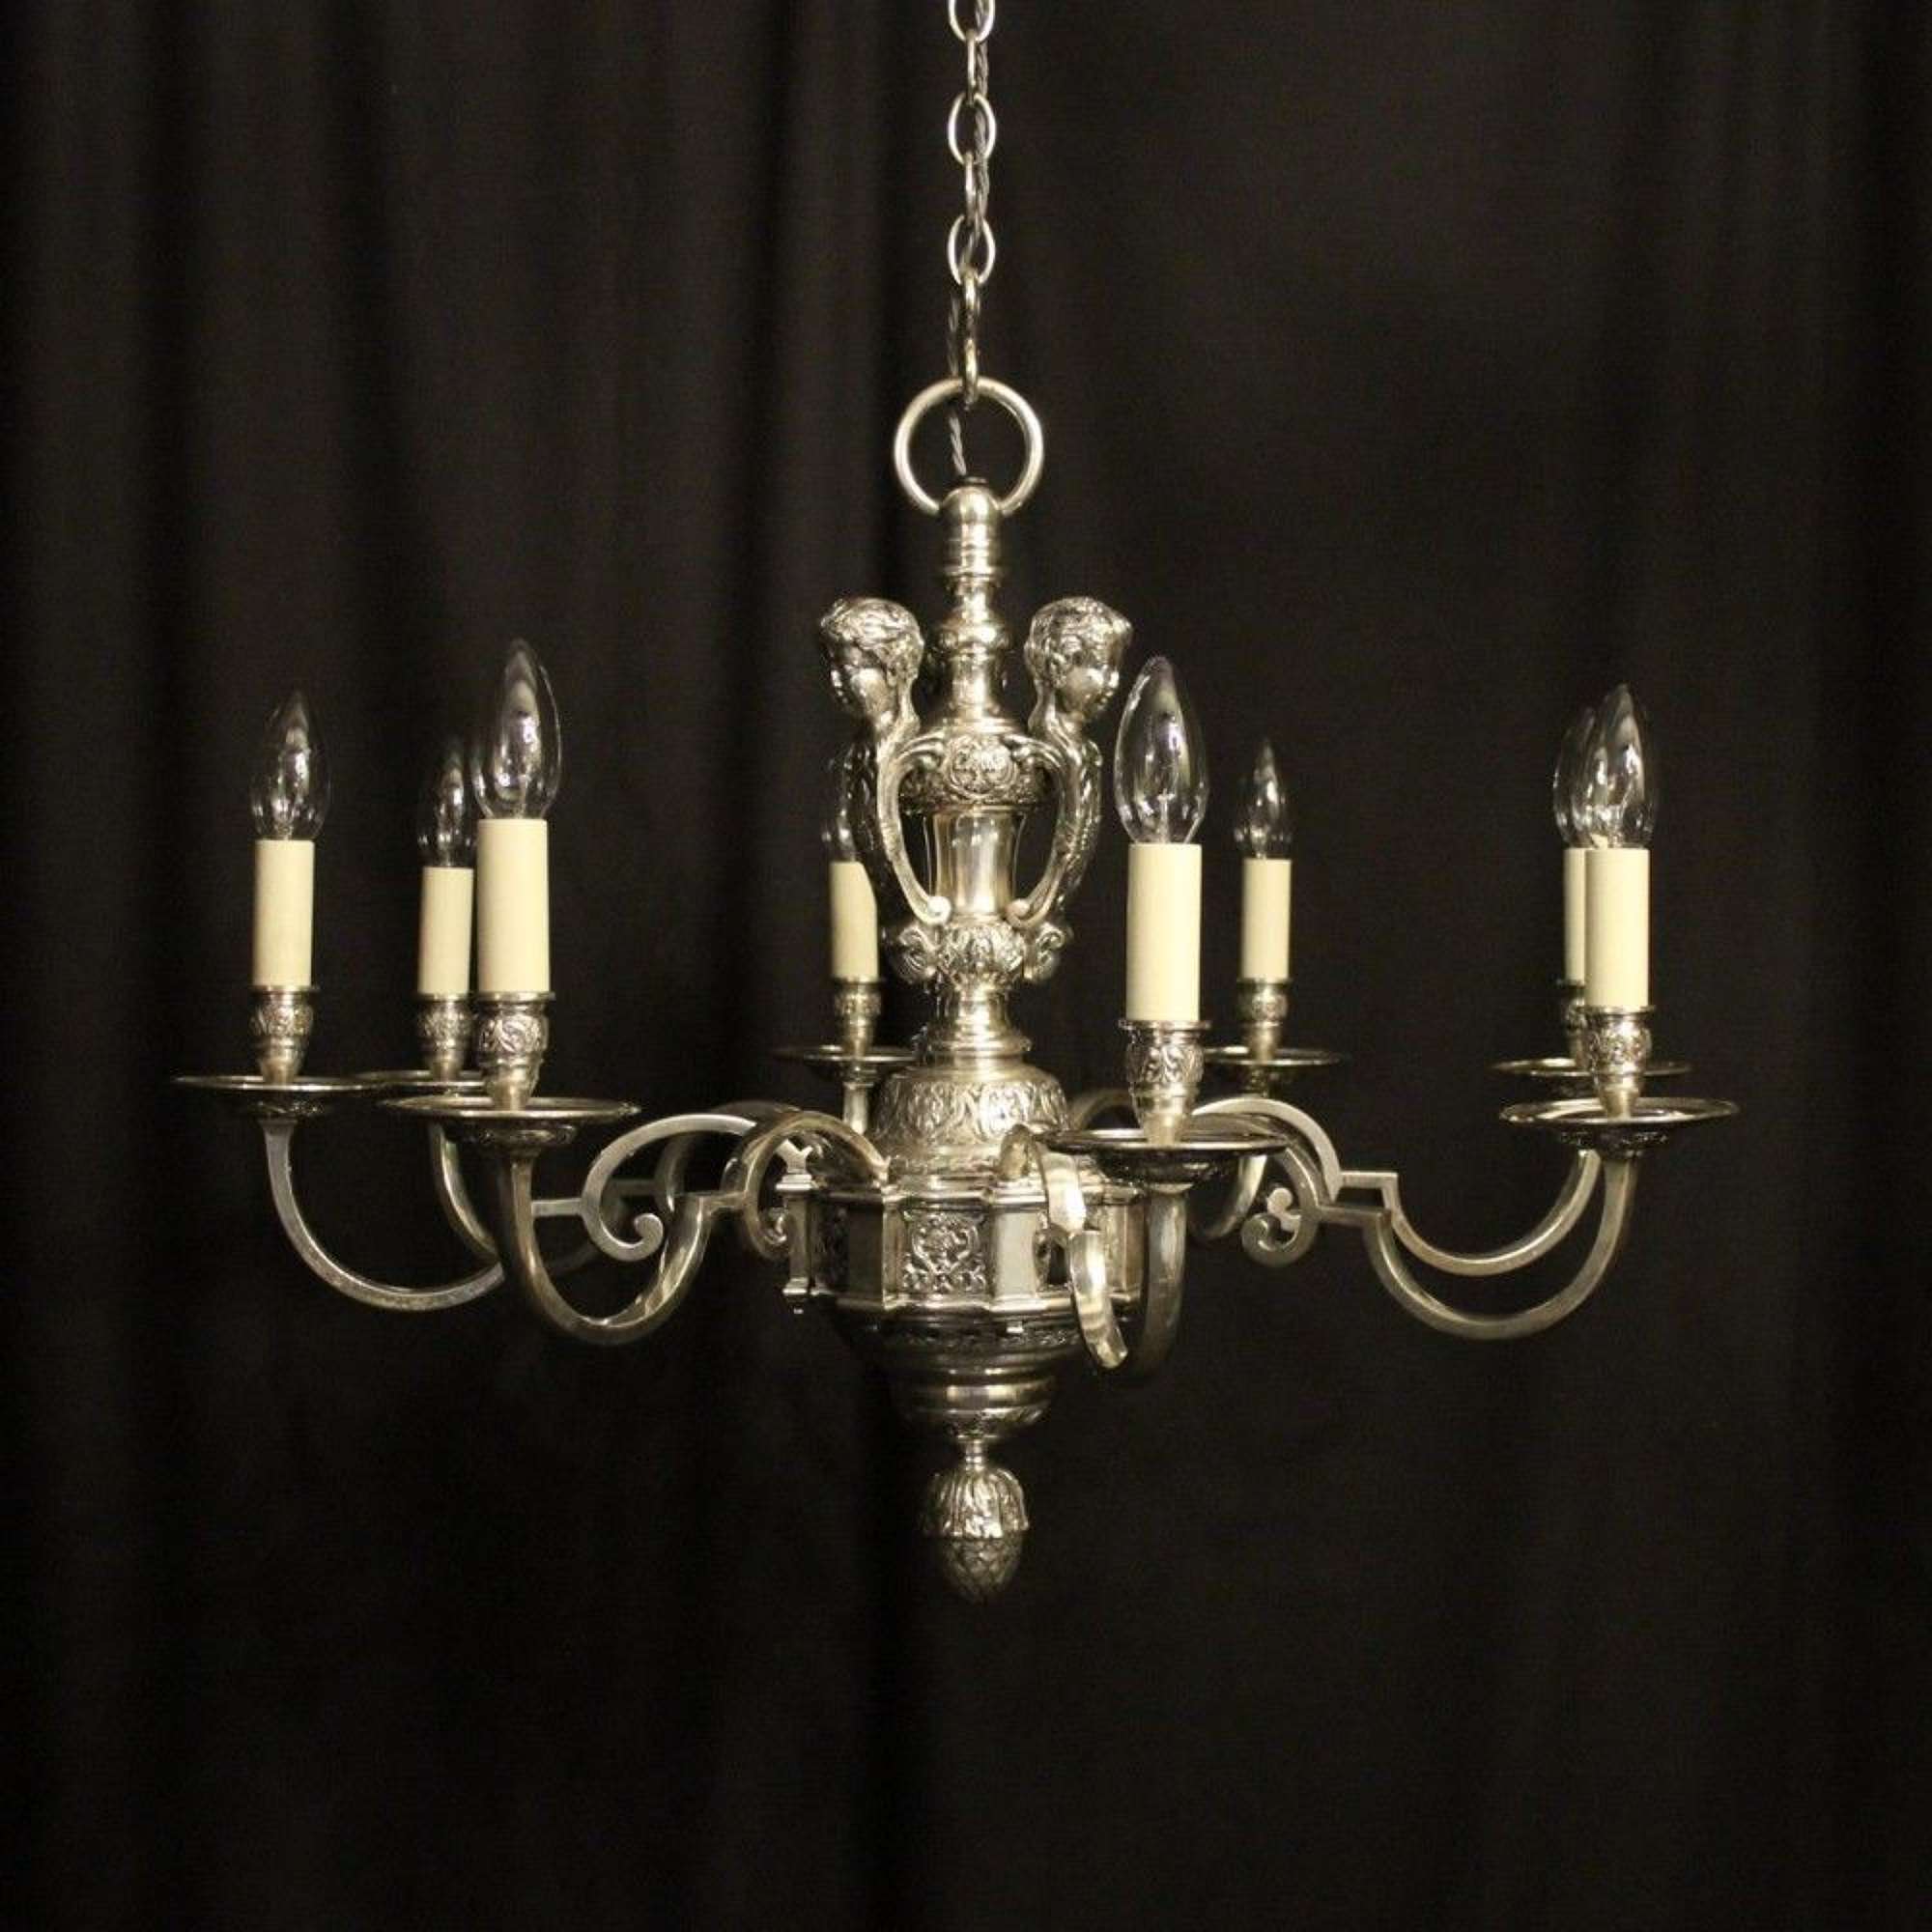 French Silver Gilded 8 Light Antique Chandelier